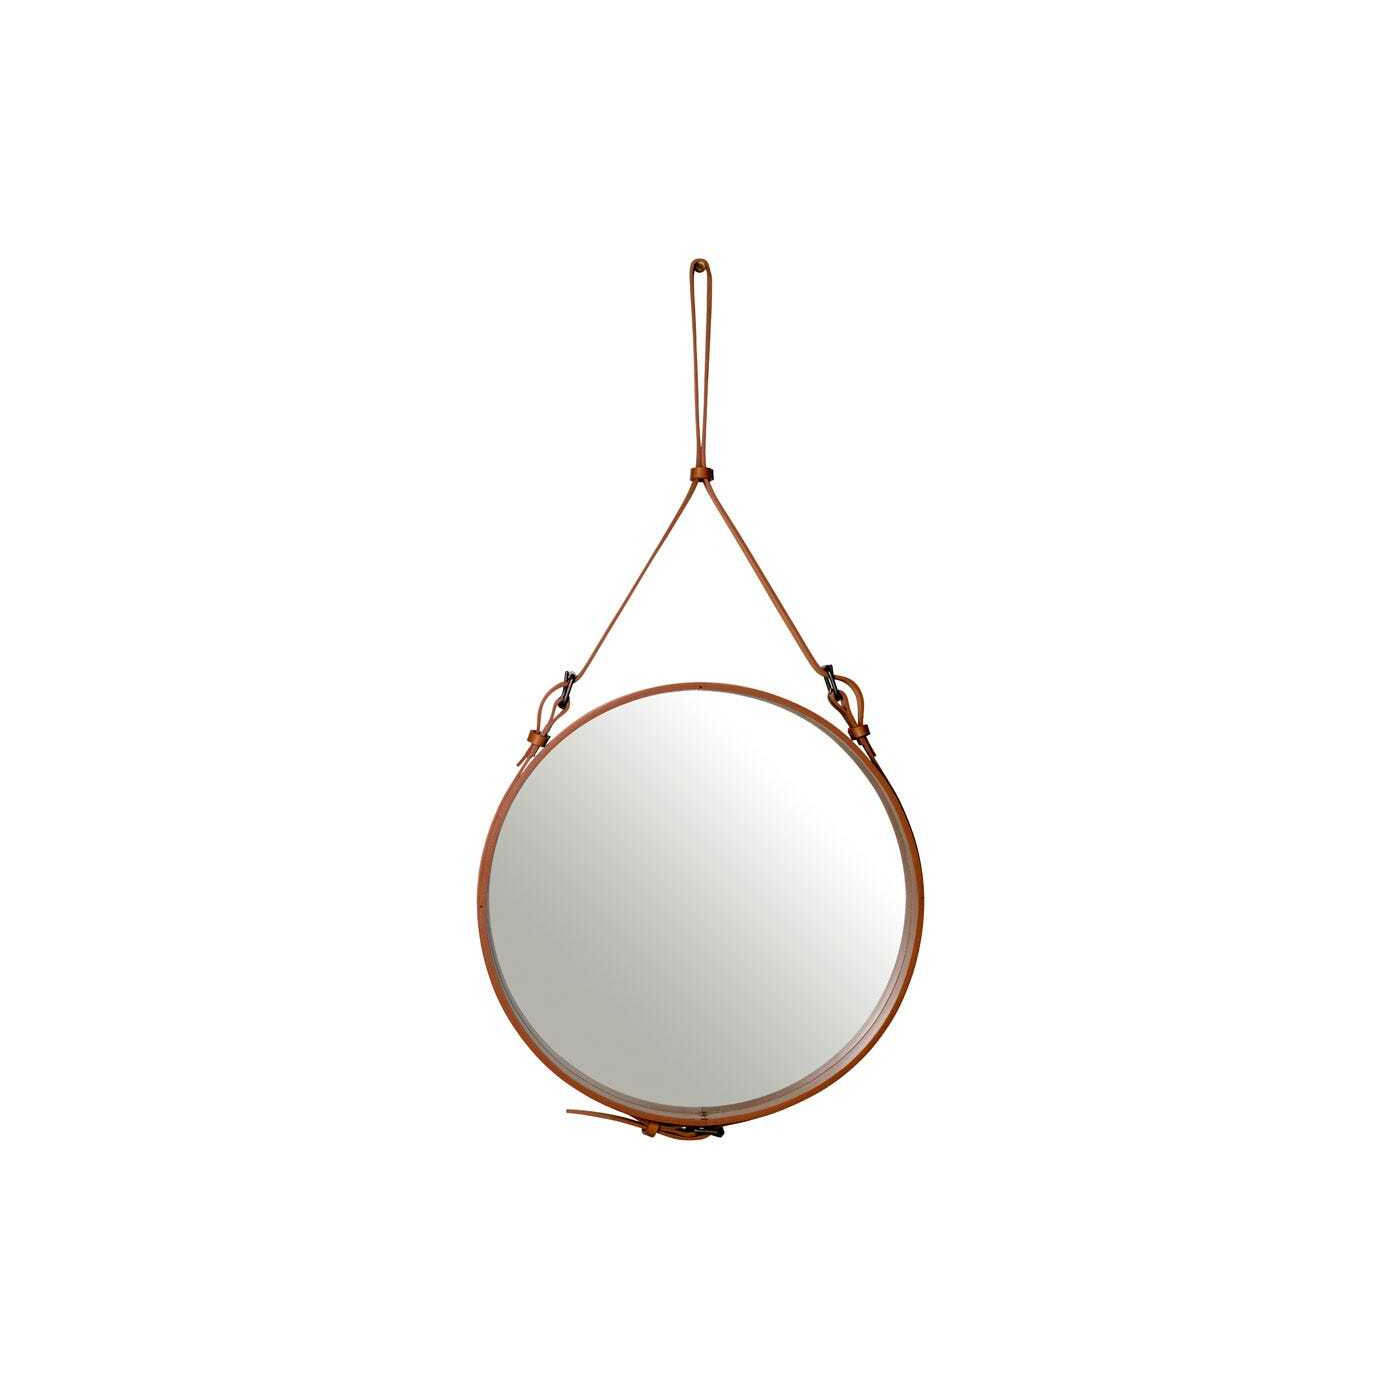 Gubi Adnet Wall Mirror Small Tan Leather - image 1